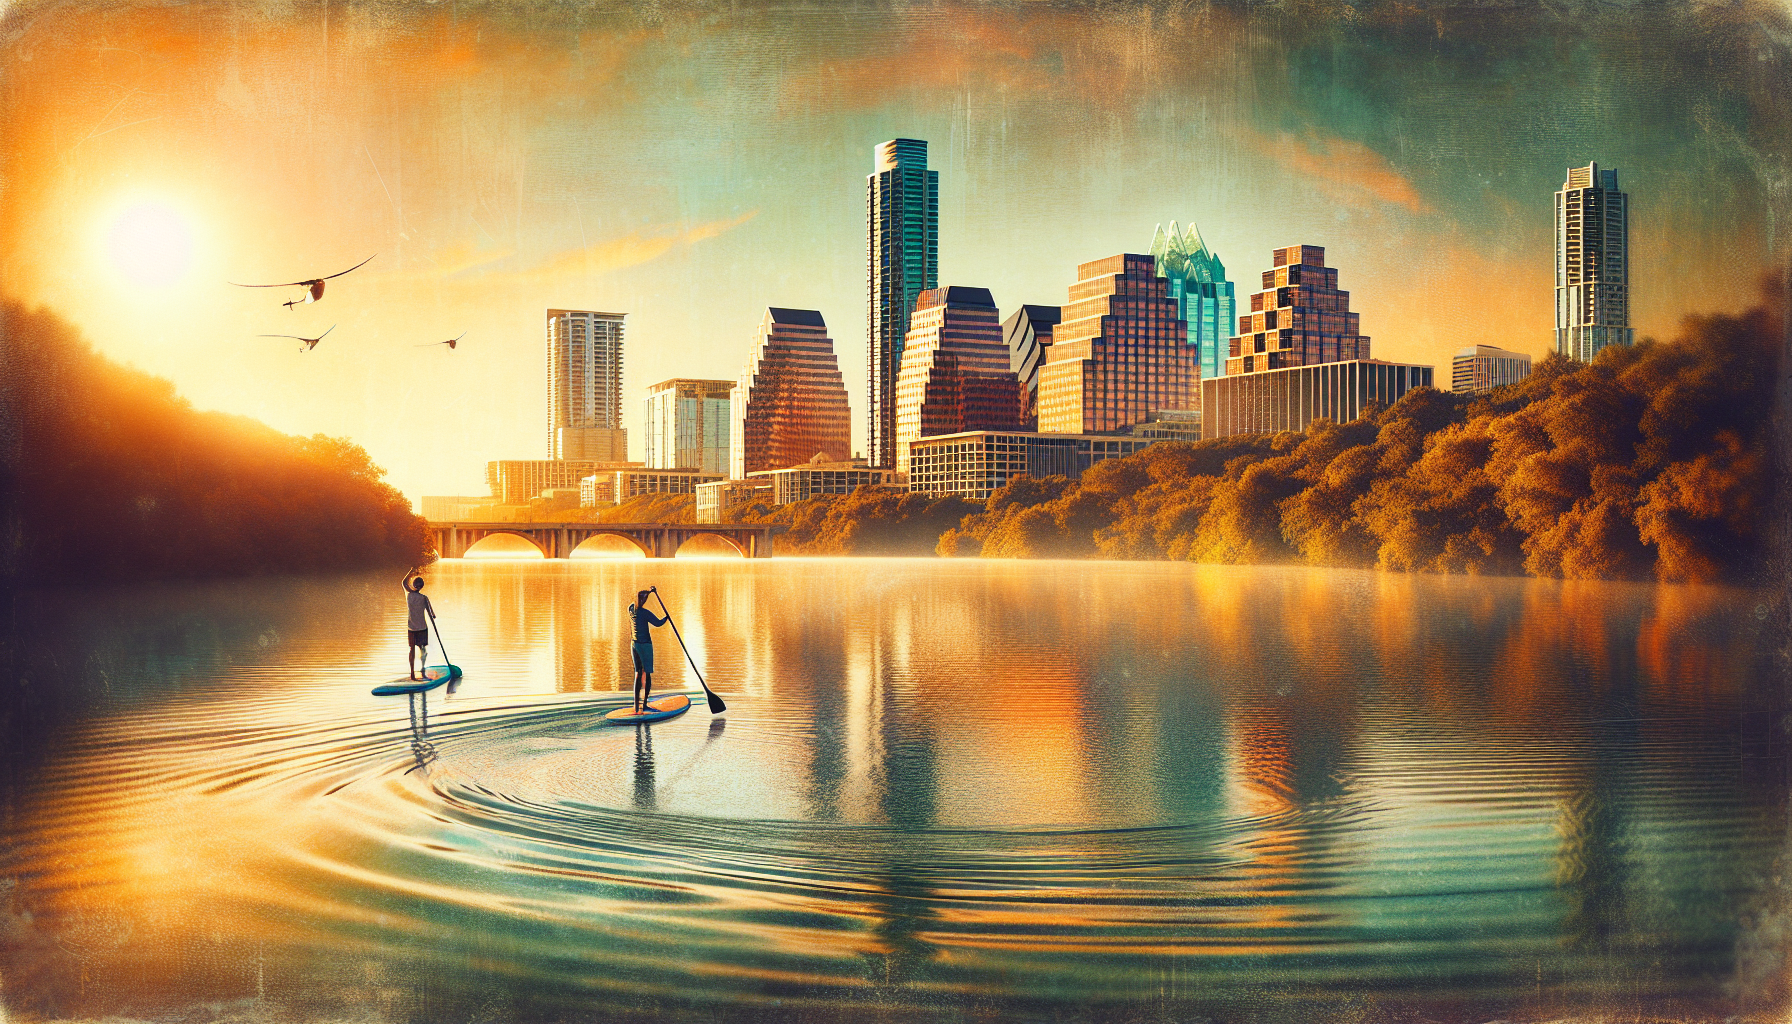 Paddleboarders on Lady Bird Lake with the Austin skyline in the distance, showcasing the urban oasis